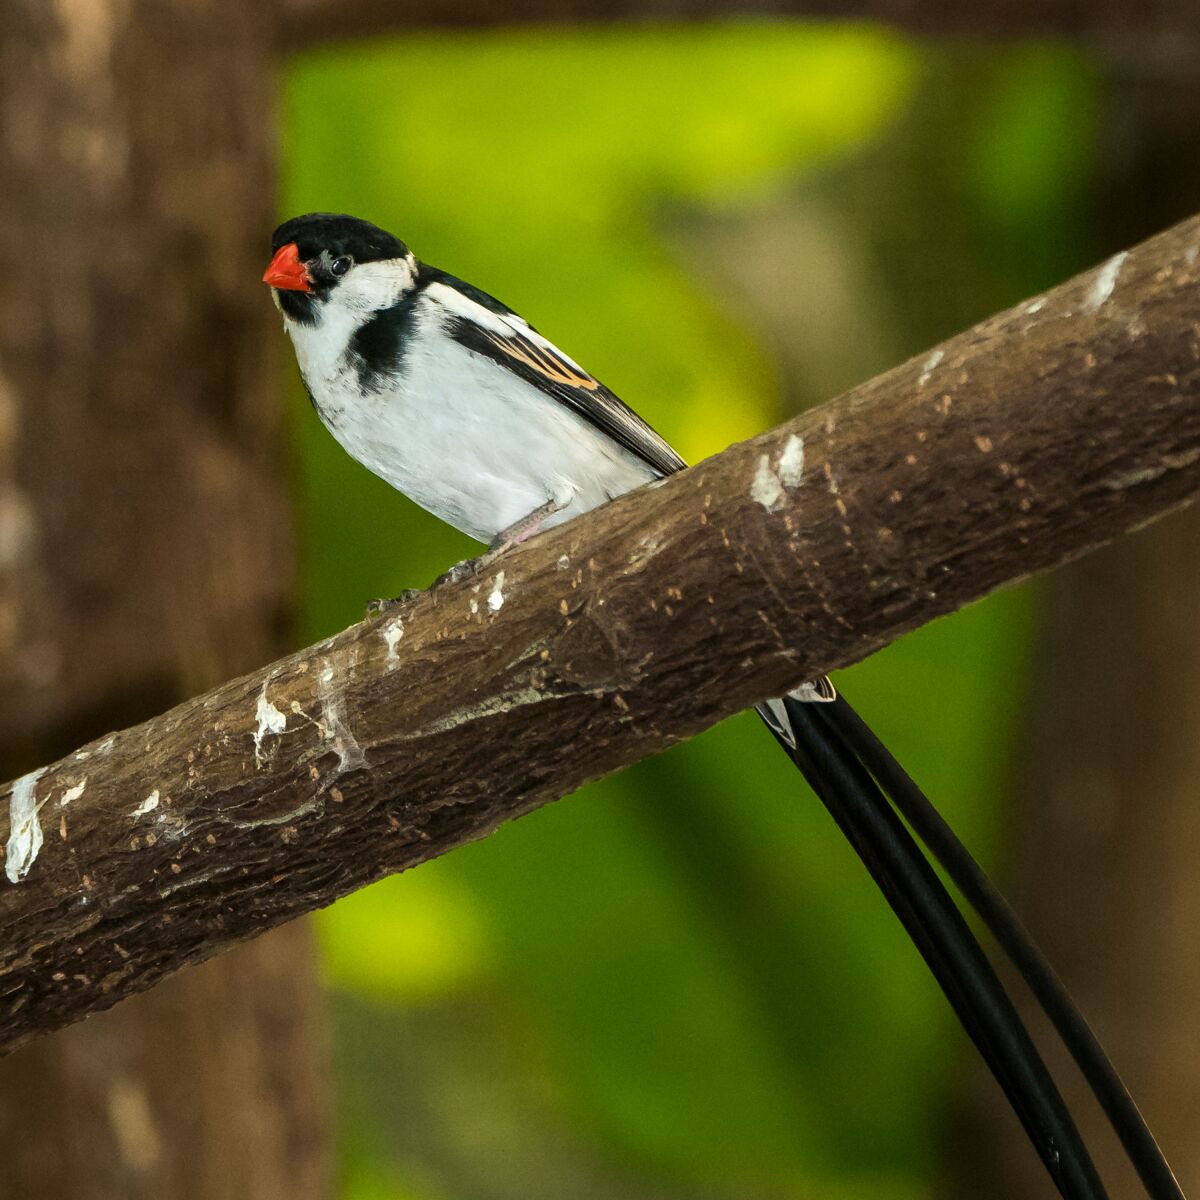 Pin-tailed whydah with orange beak and white breast.